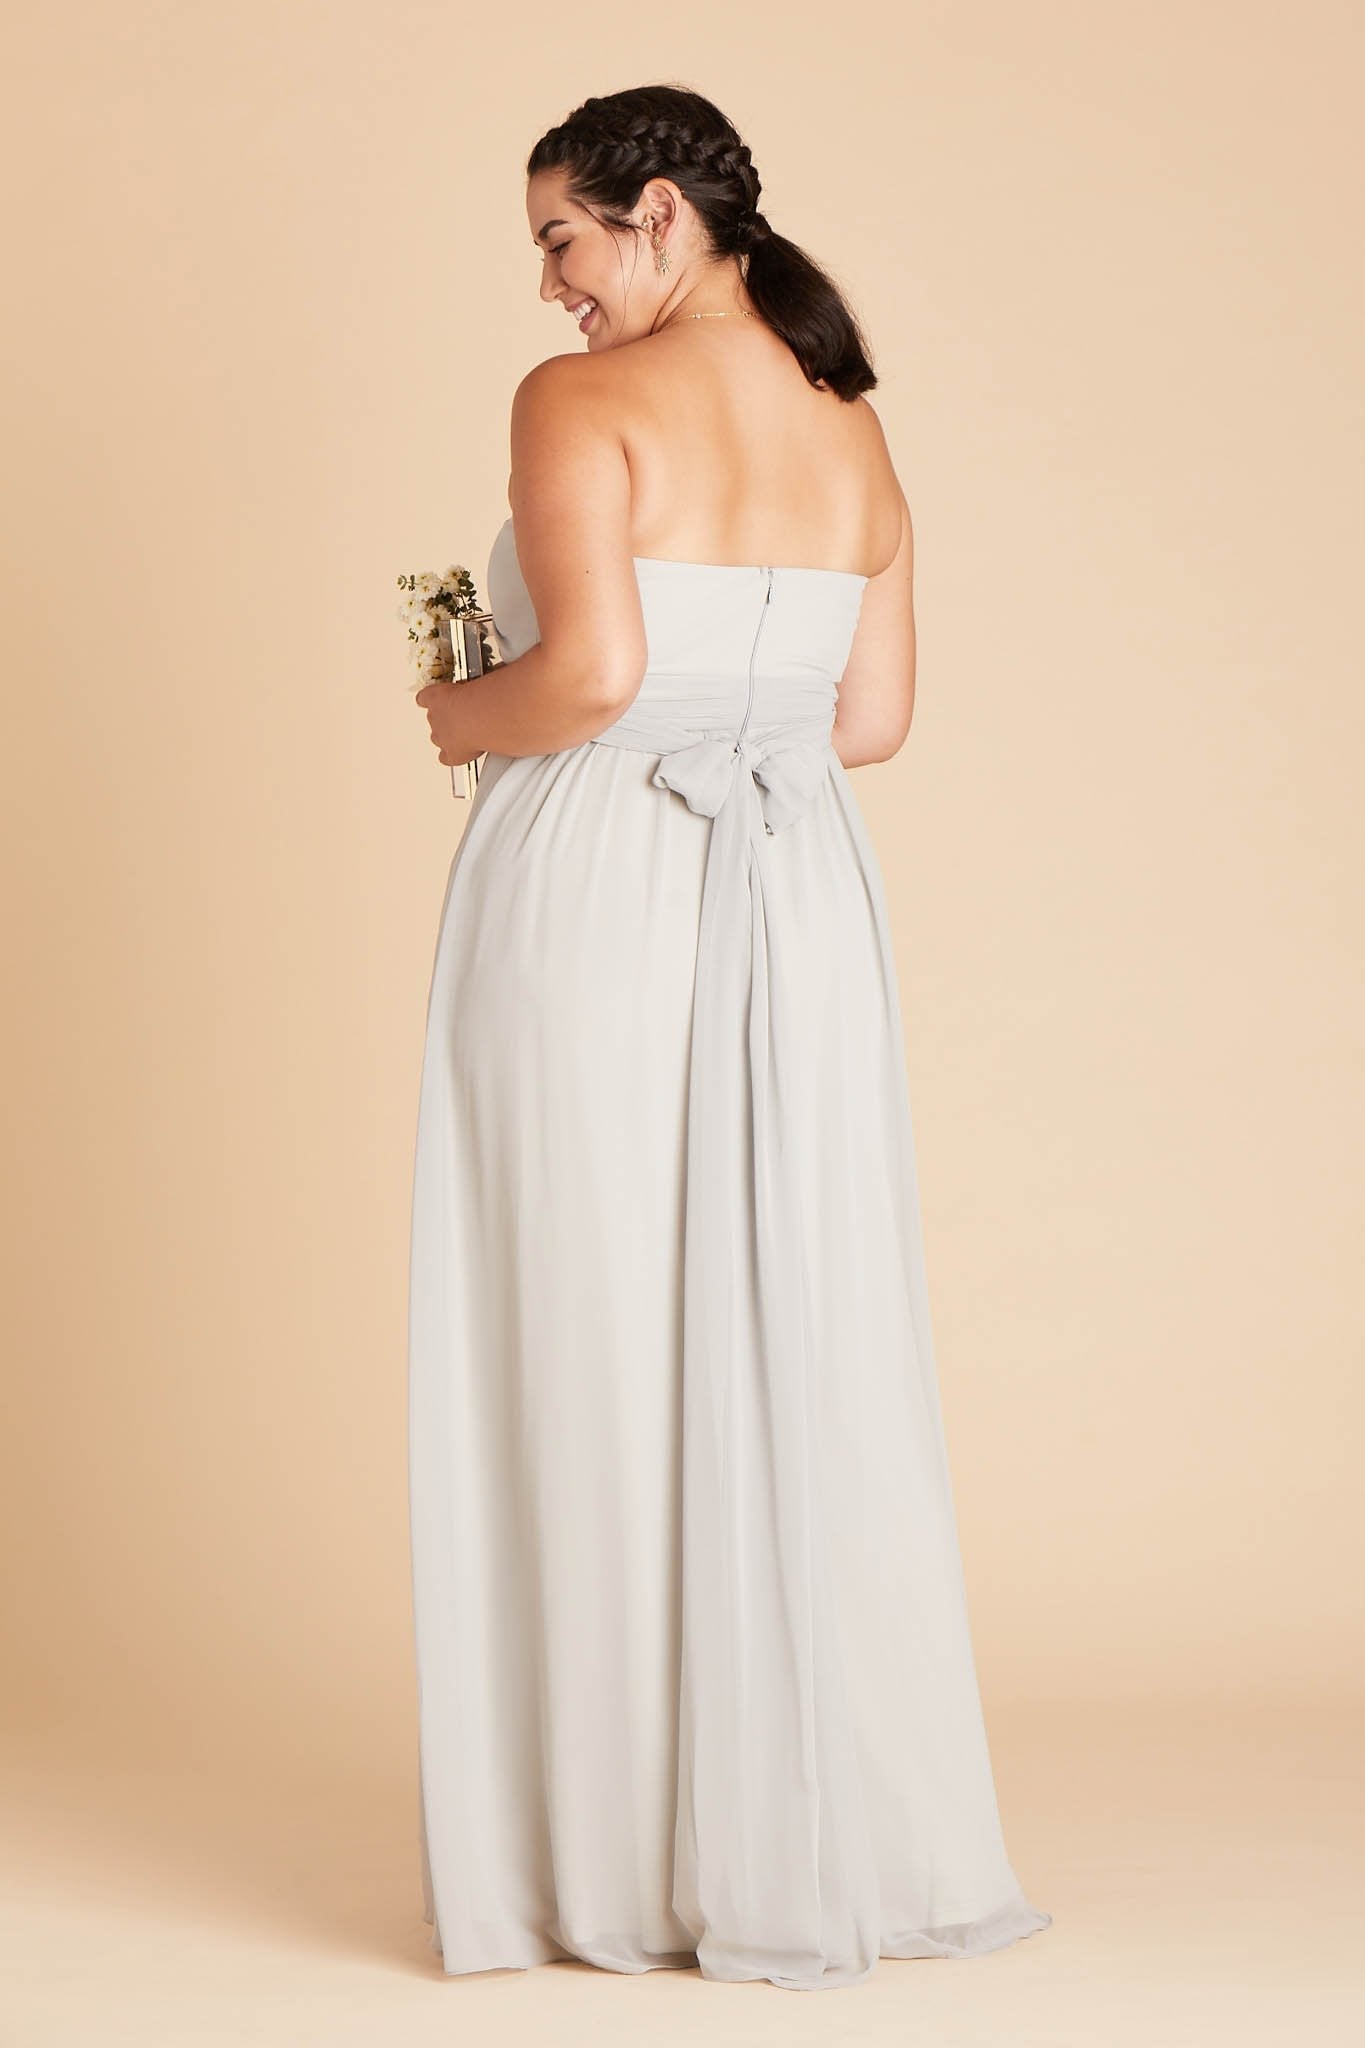 Grace convertible plus size bridesmaid dress in dove gray chiffon by Birdy Grey, back view